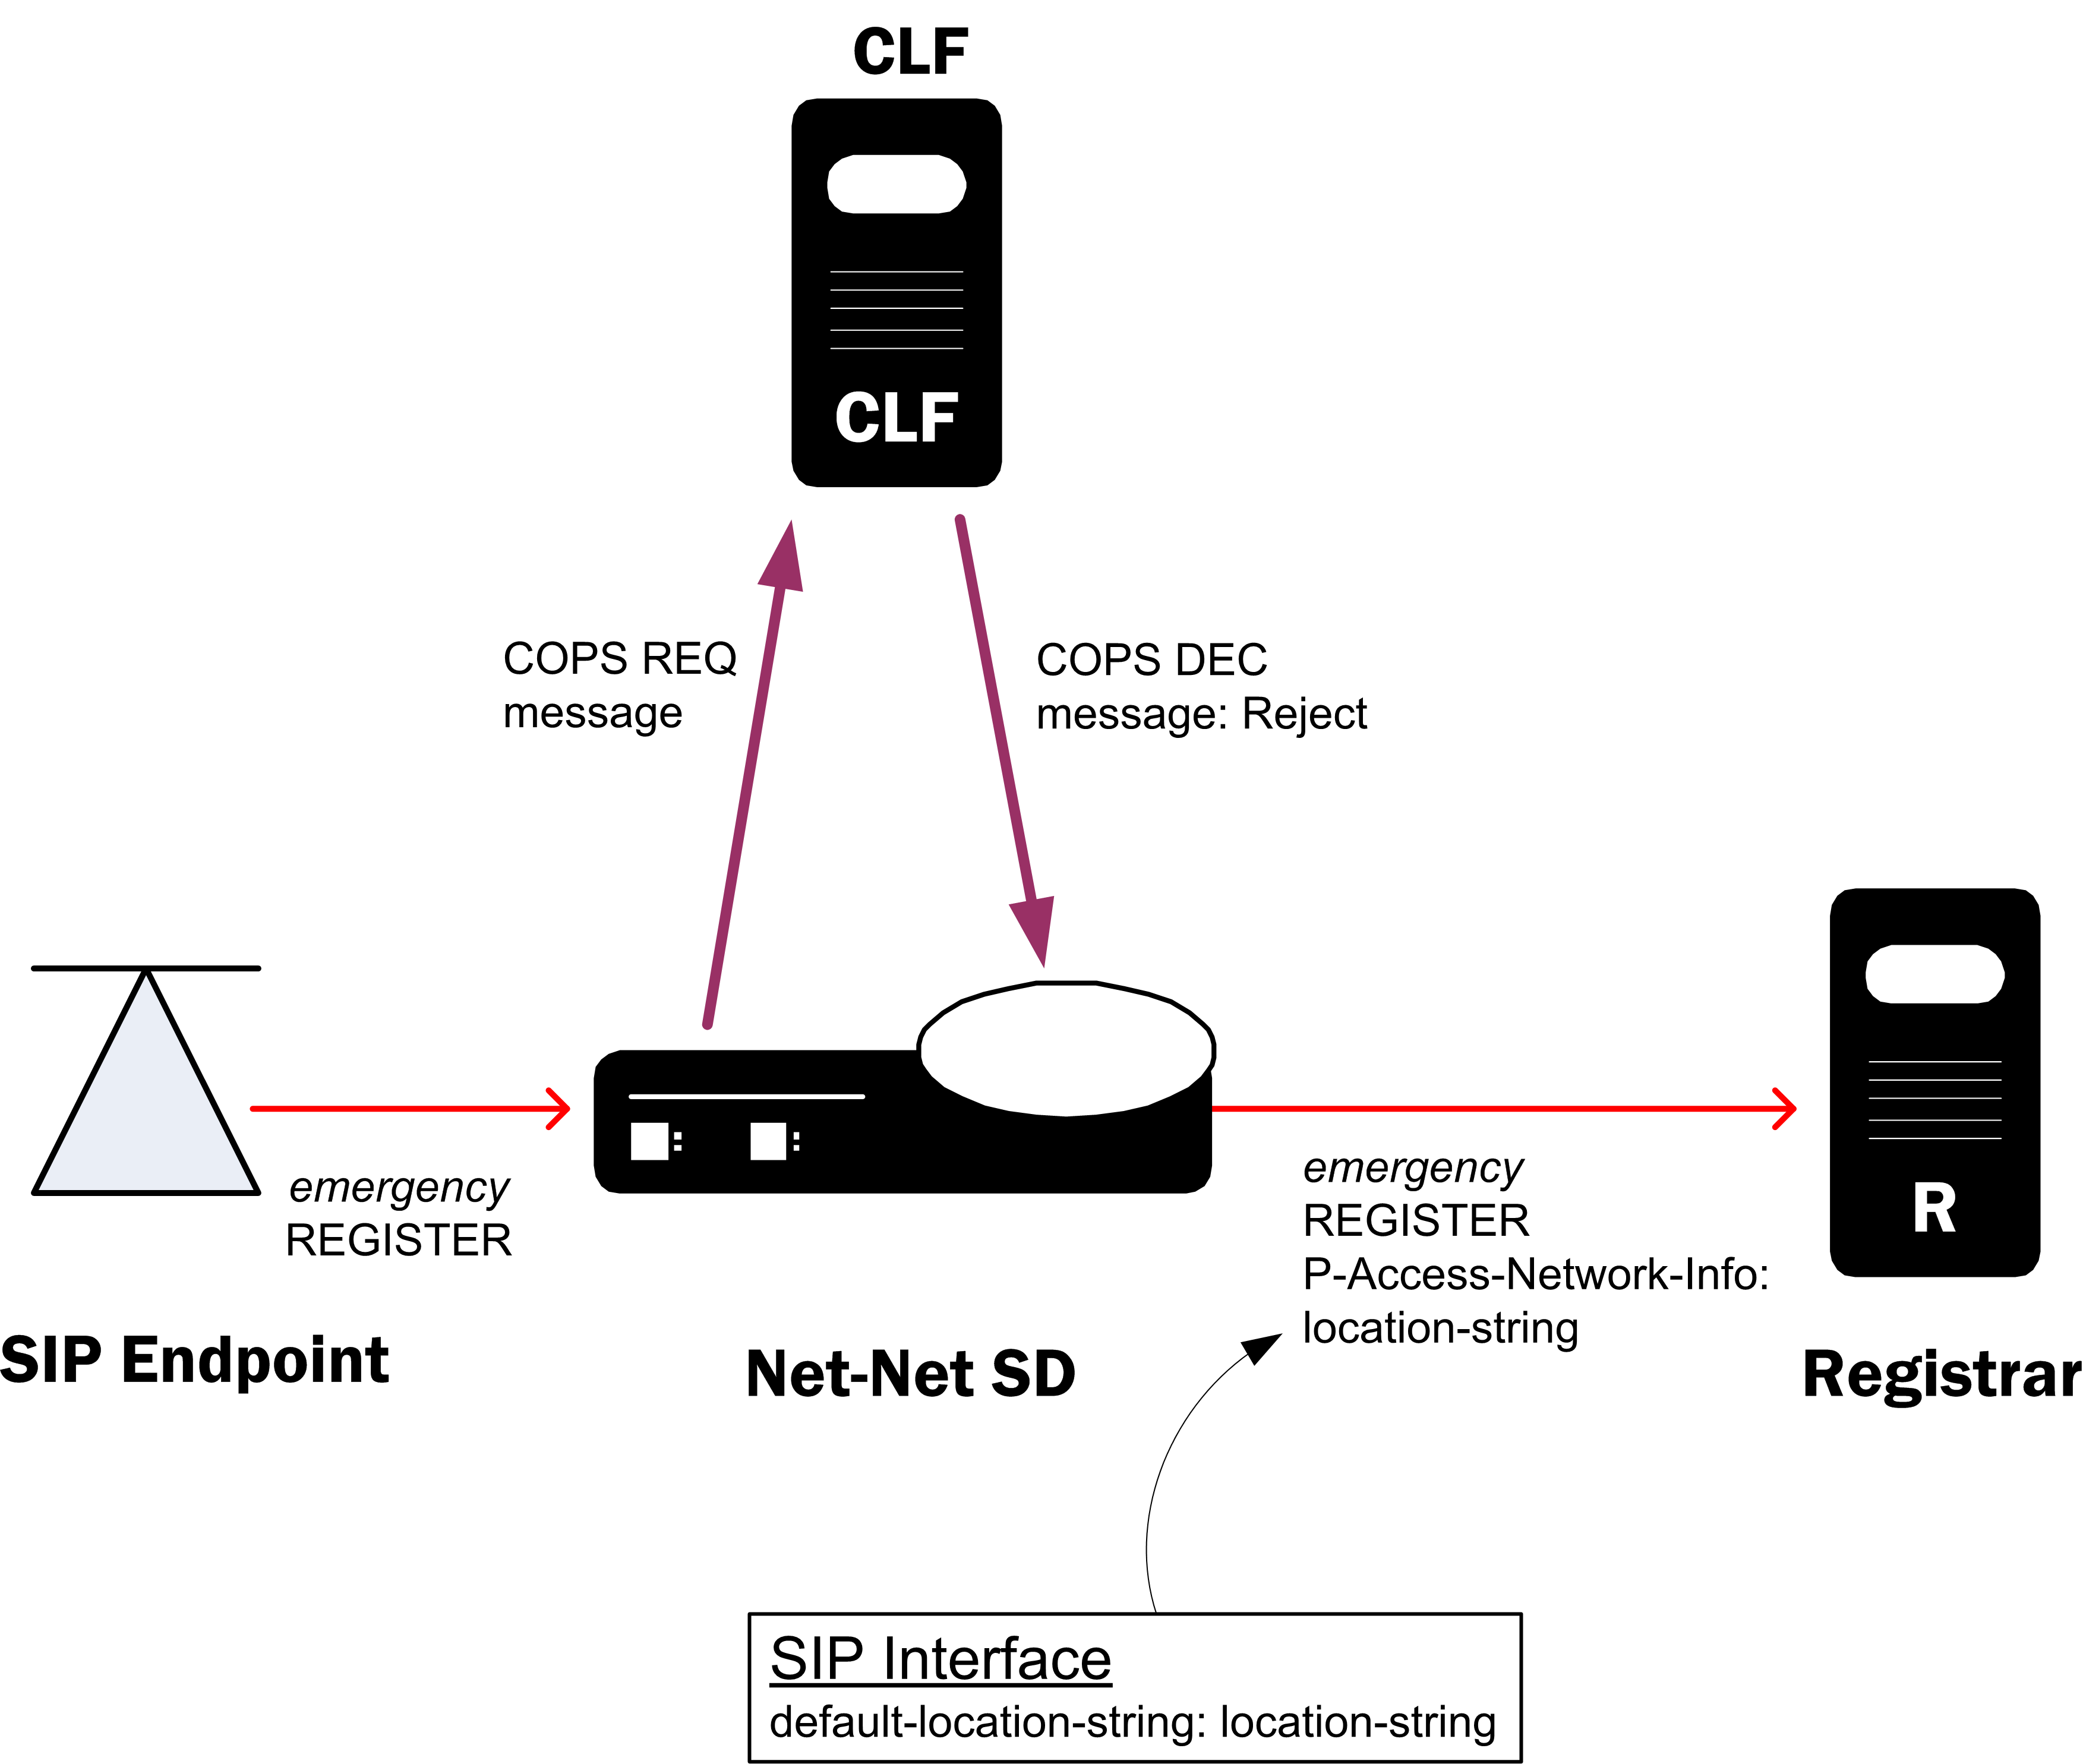 Depicts CLF deployment components supporting emergency calls.